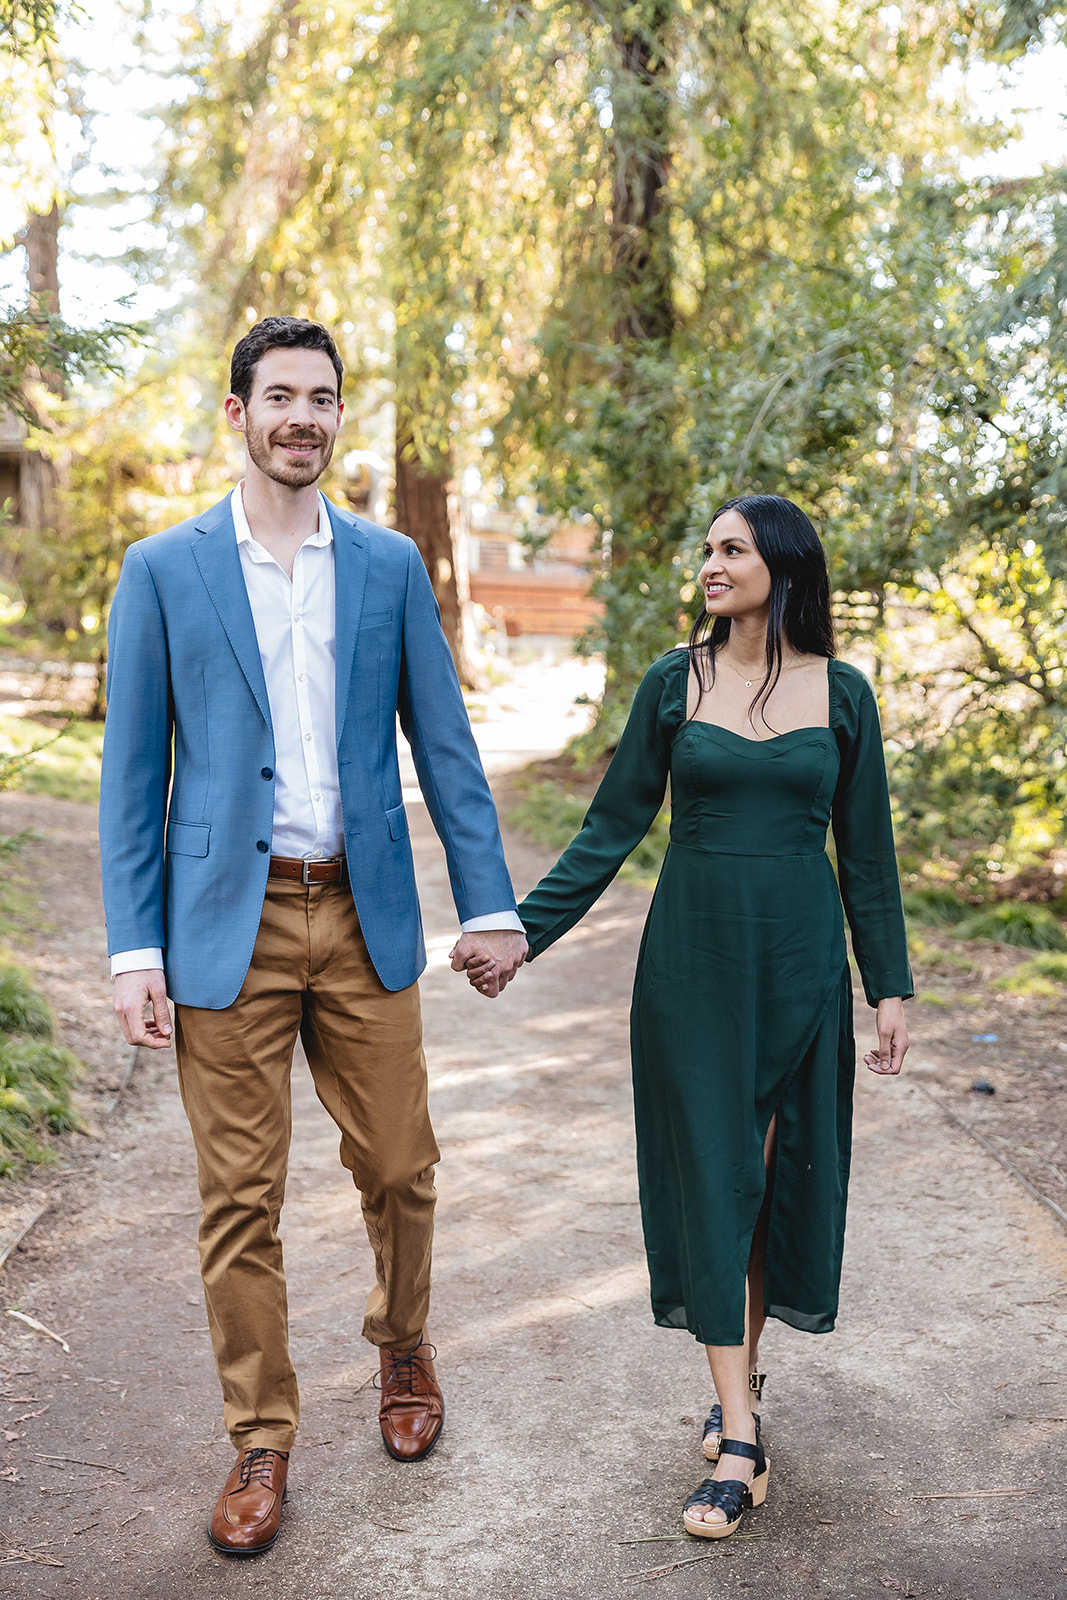 Engaged couple walking down a path at the uc davis arboretum. Photo by wedding photographer philippe studio pro.